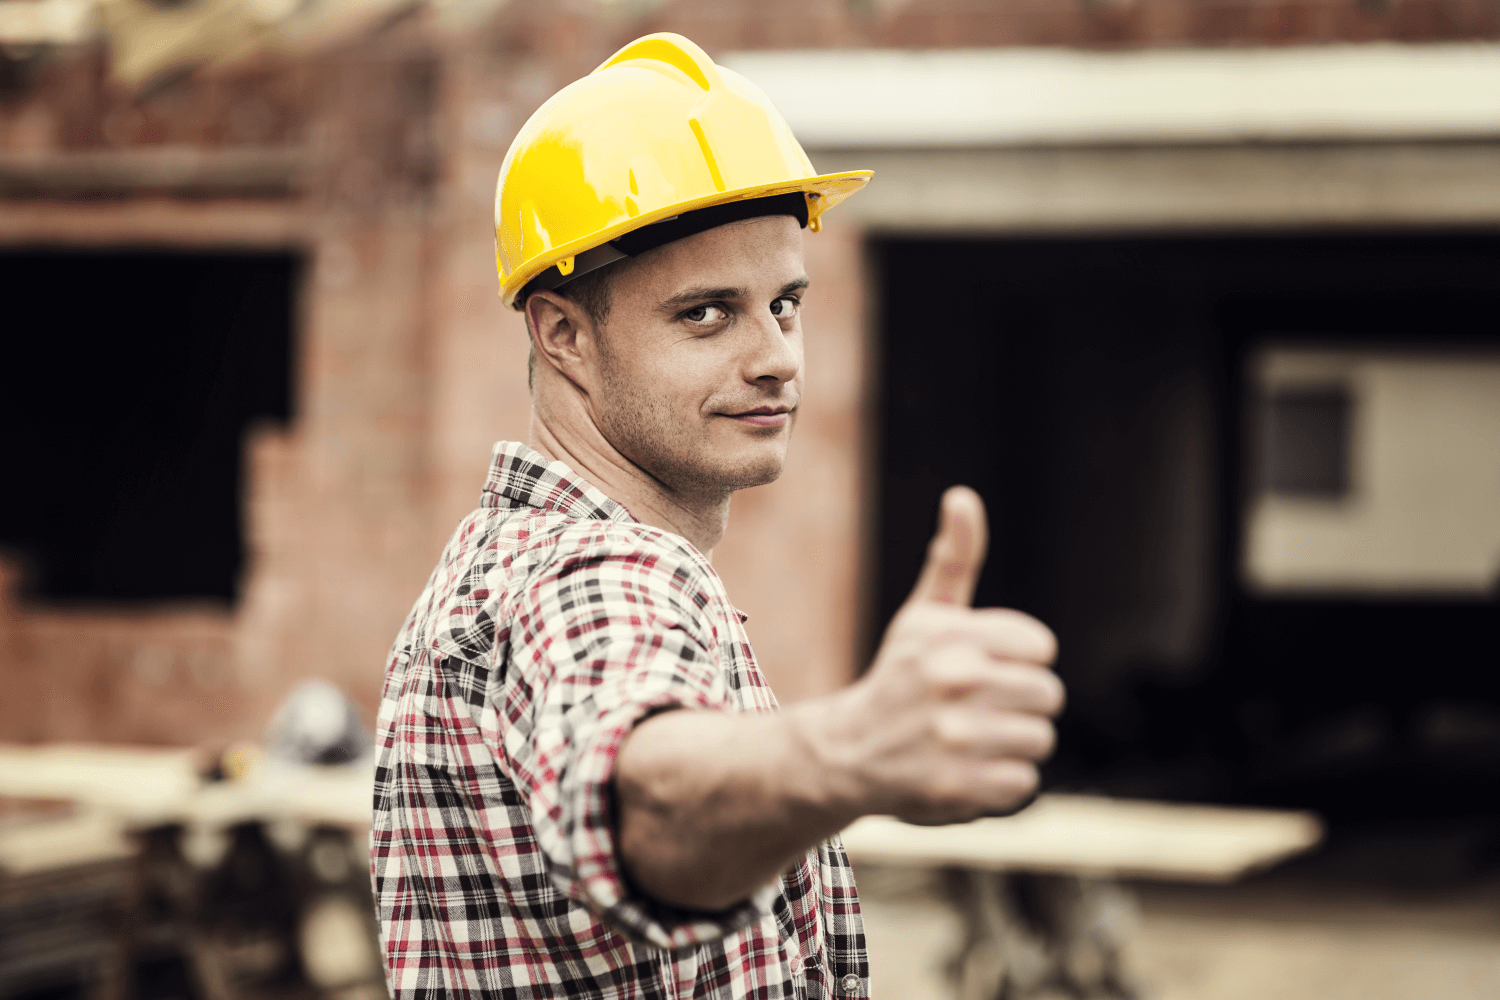 Licensed Roofing Contractors: How To Verify Your Contractor is Insured